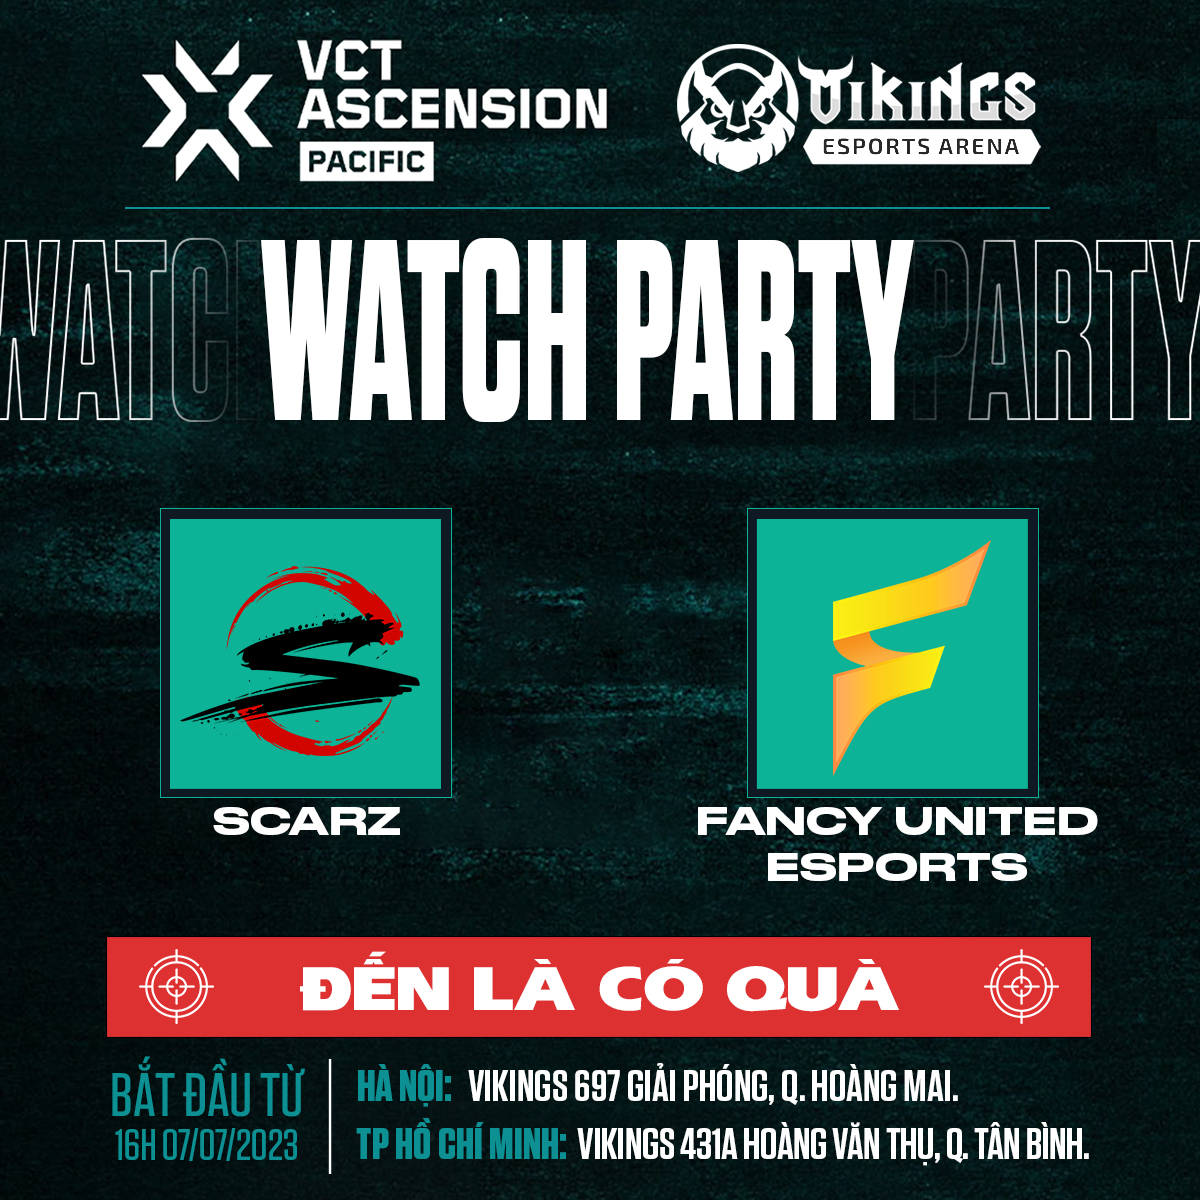 WATCH PARTY VCT ASCENSION PACIFIC: FANCY UNITED ESPORTS vs SCARZ